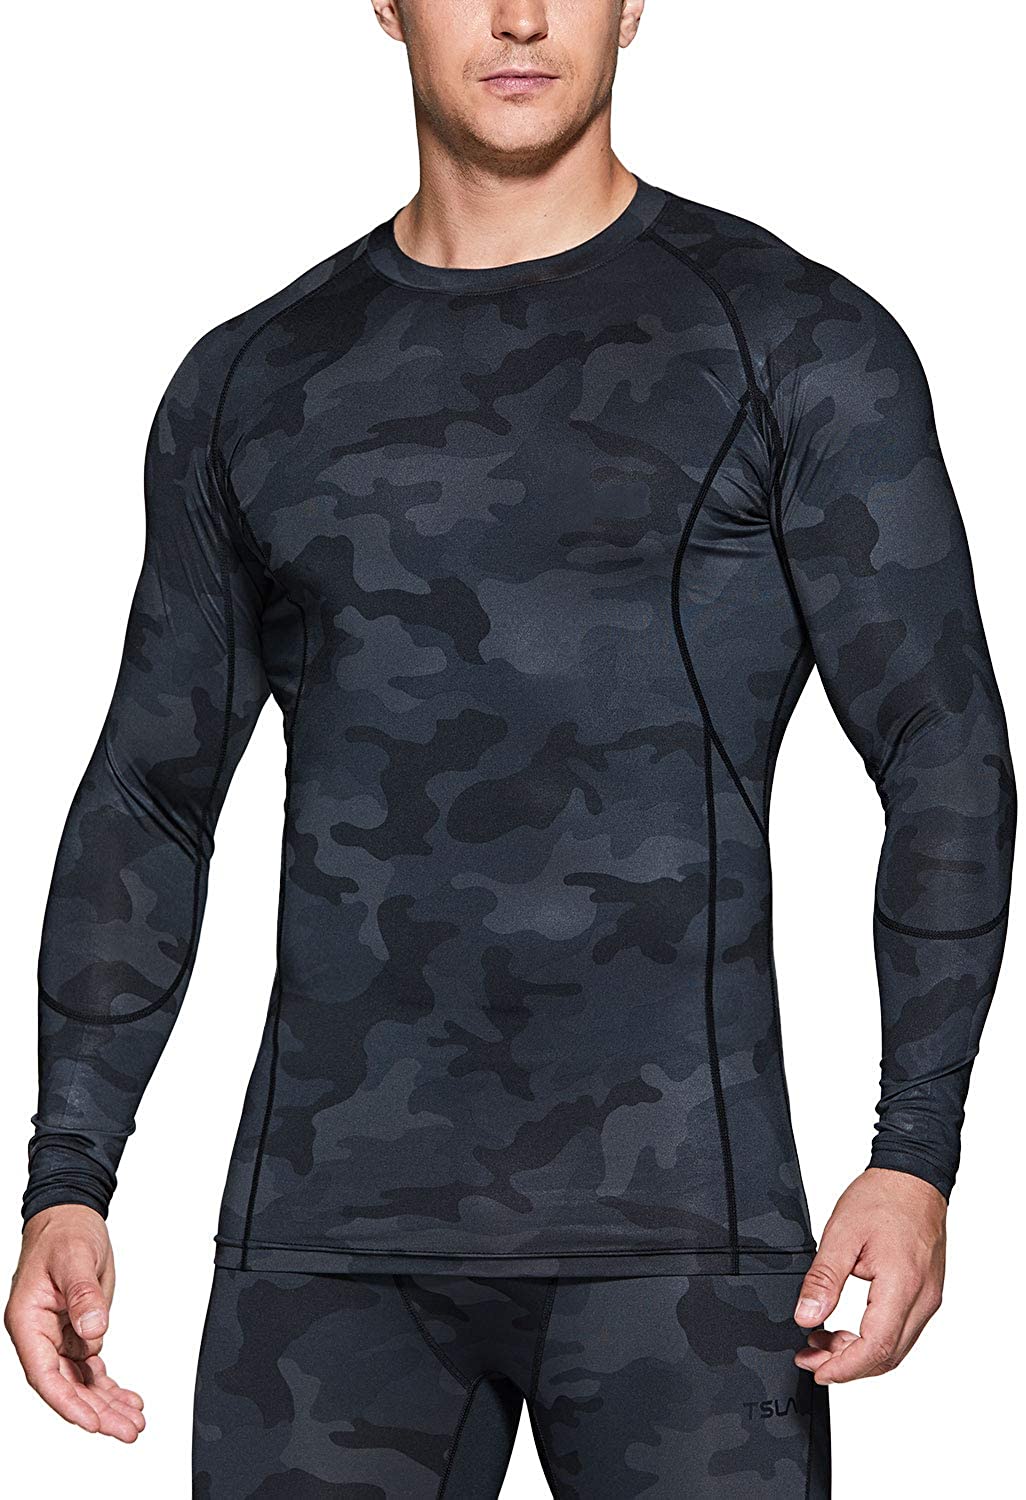 Men's Cool Dry Athletic Compression Long Sleeve Baselayer Workout T-Shirts Camo 